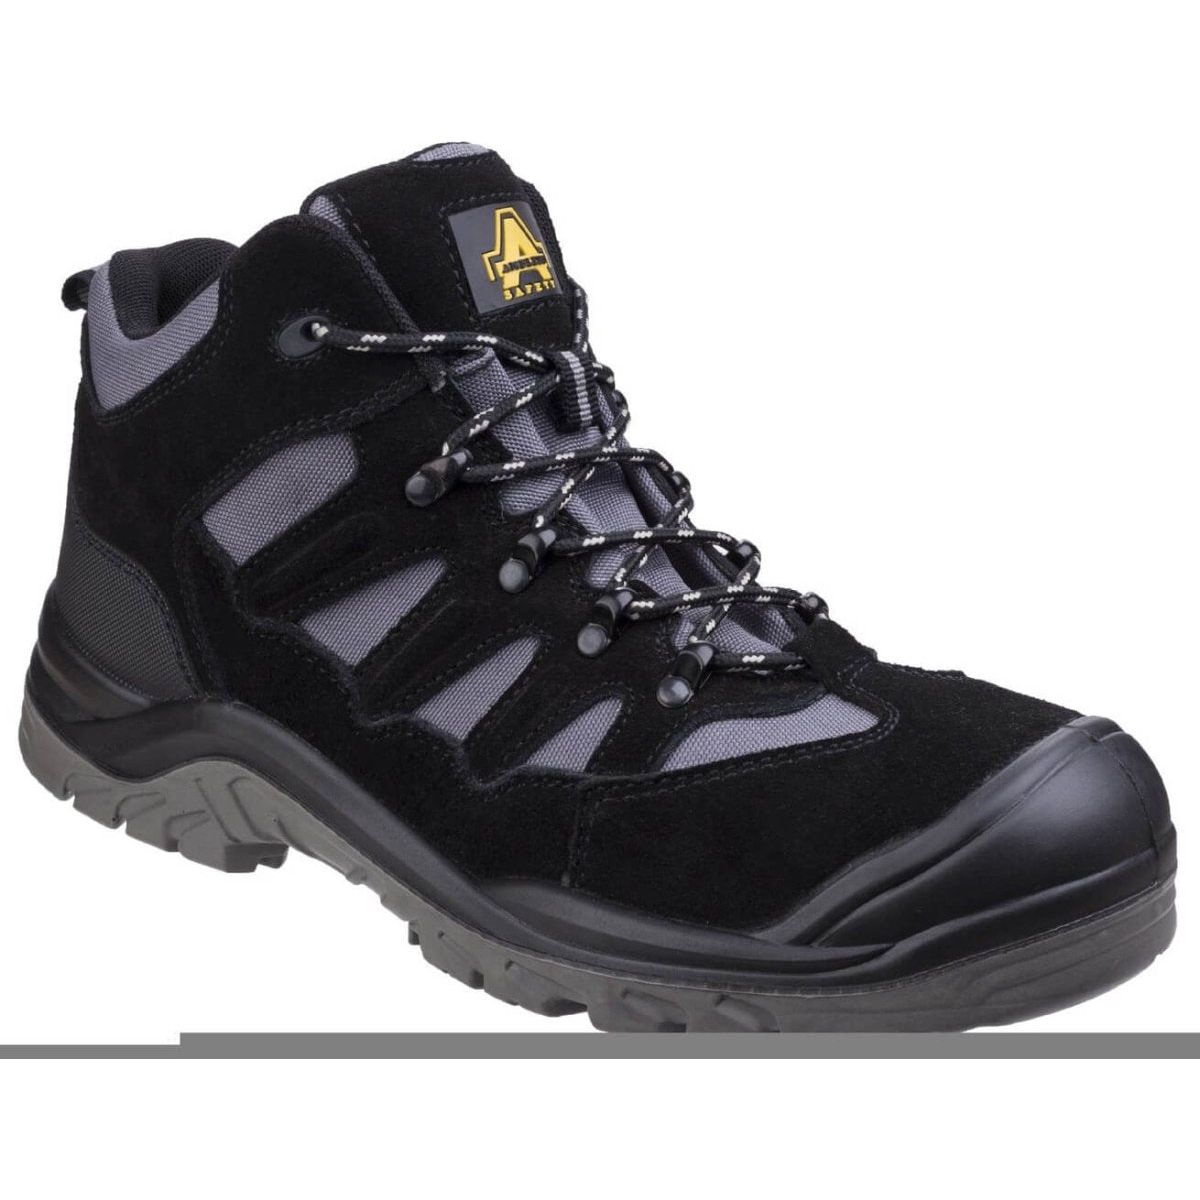 Amblers As251 Safety Hiking Boots Mens - workweargurus.com